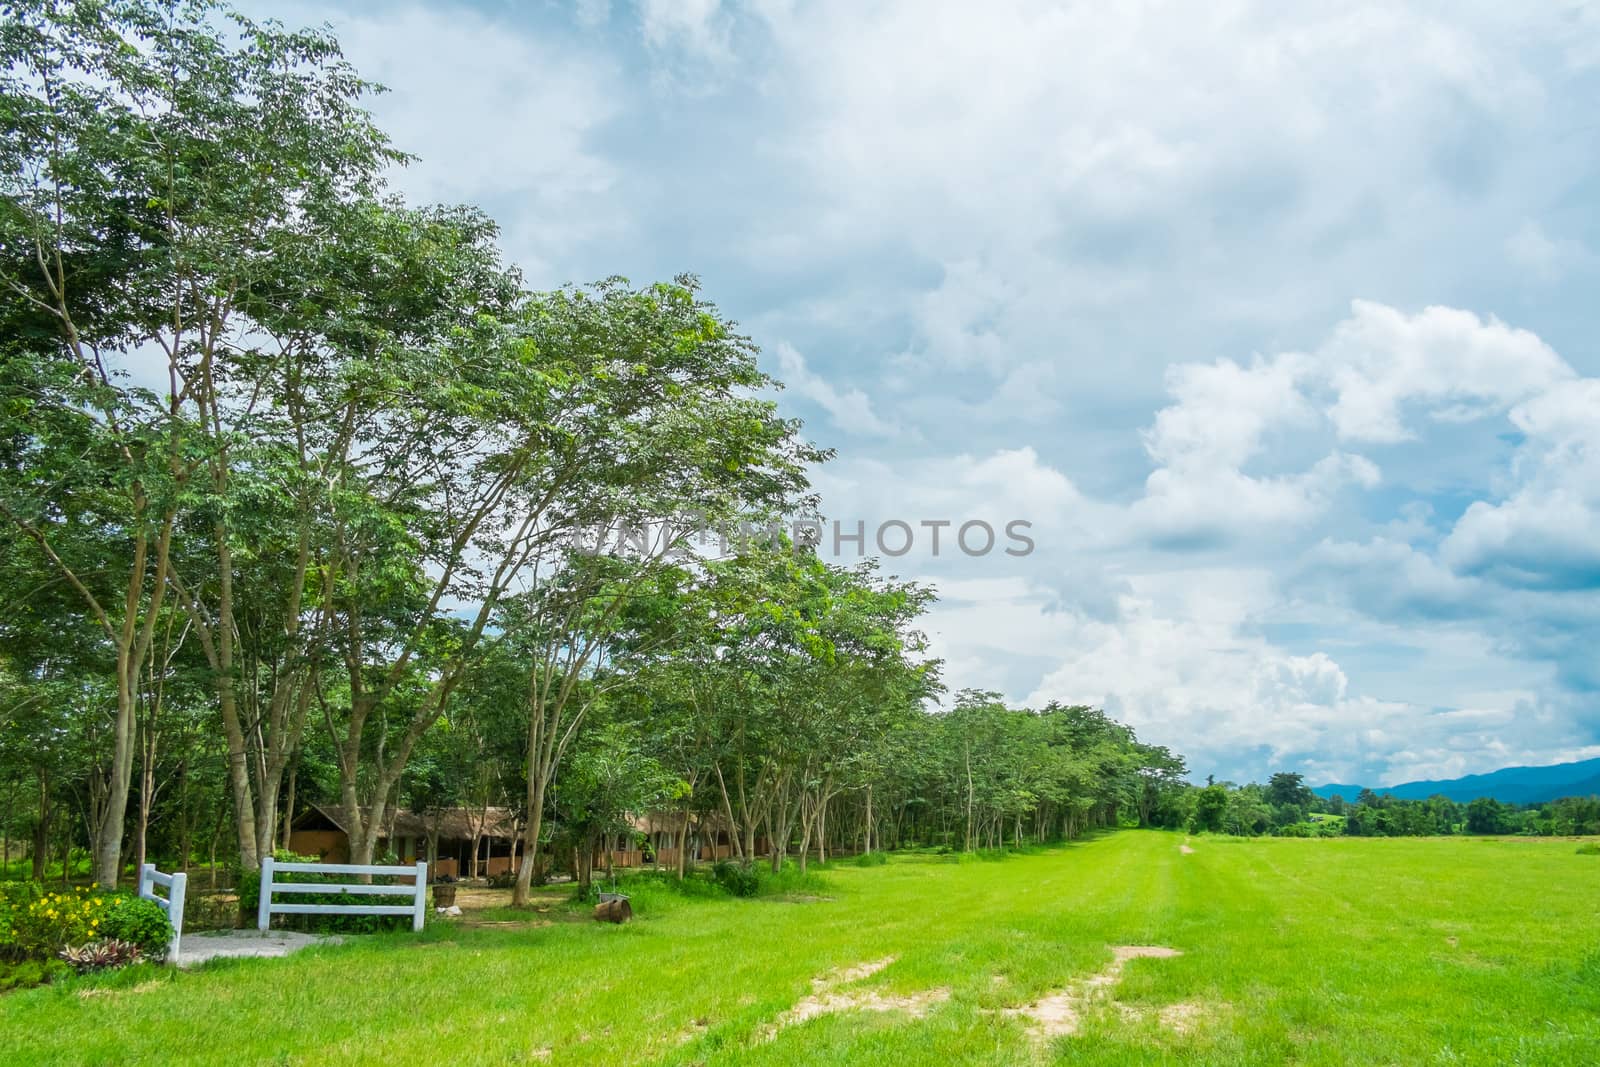 Tree in farm filed with cloudy by moggara12